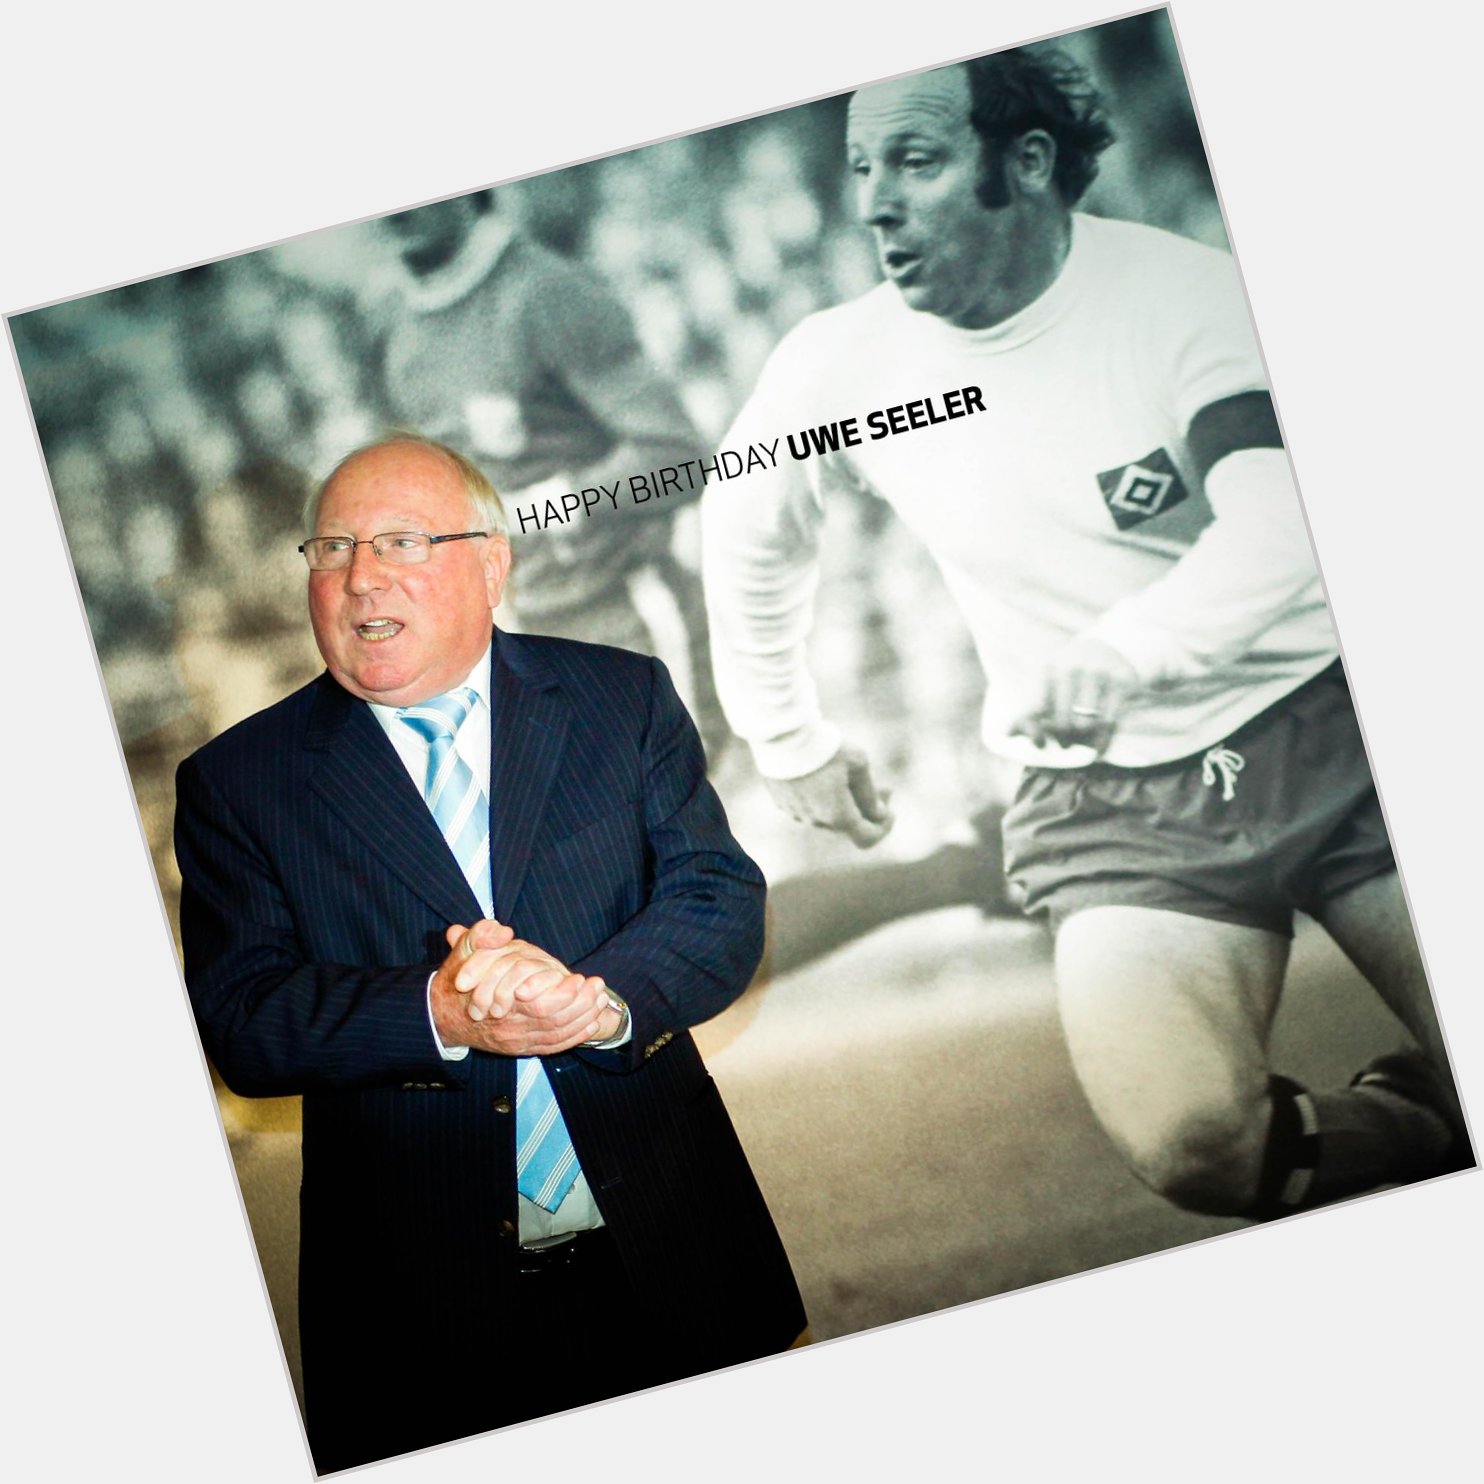 Happy 78th birthday to and Germany legend Uwe Seeler! 

Have a great day 